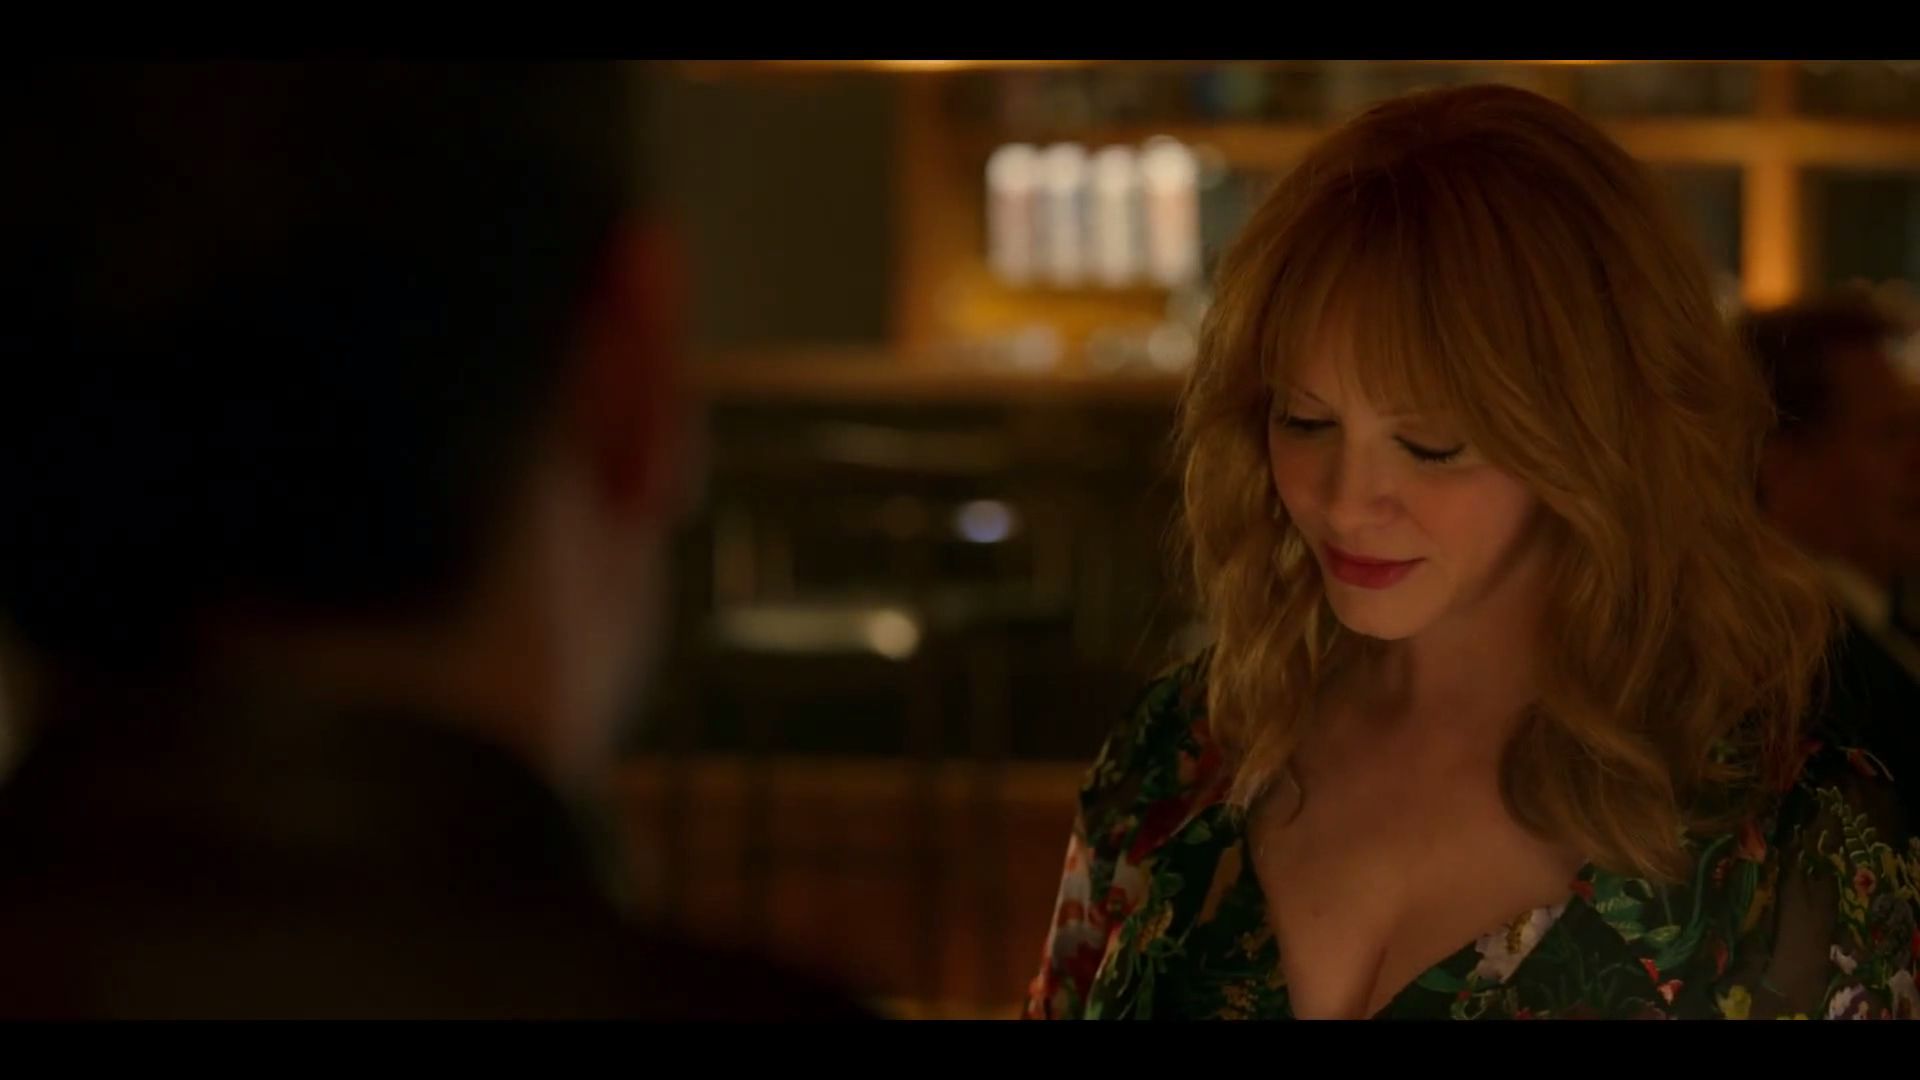 Get Ready to Be Swept Away by Christina Hendricks in These Erotic Scenes